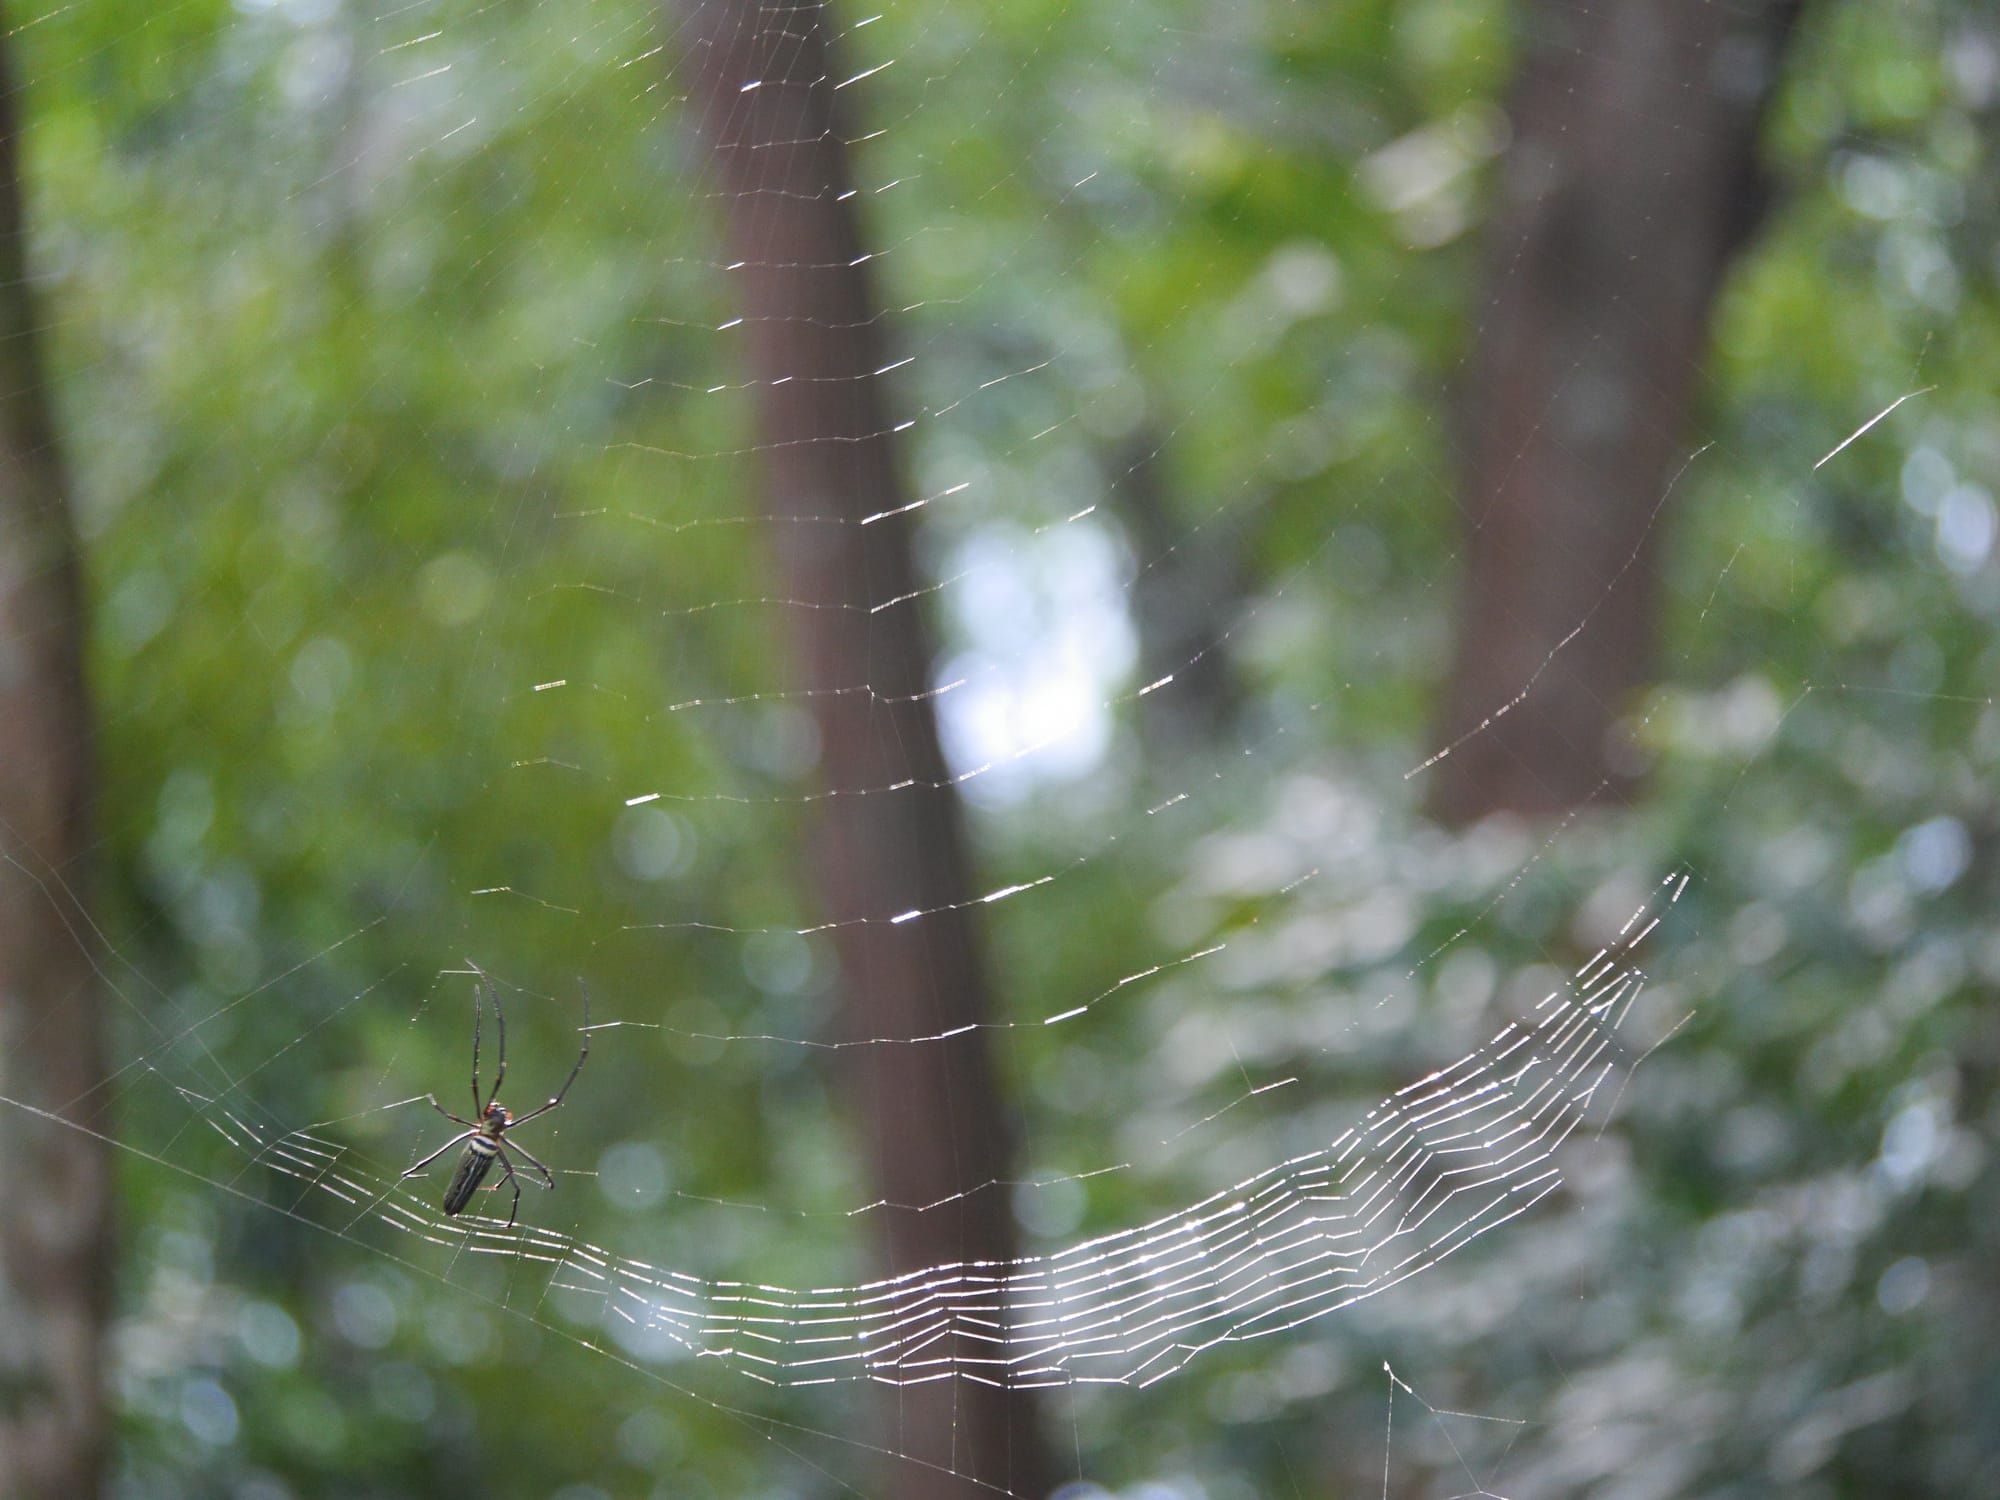 Photo by Author — Golden Orb Spider (Nephila pilipes) building its web — The Andaman Hotel, Langkawi, Malaysia